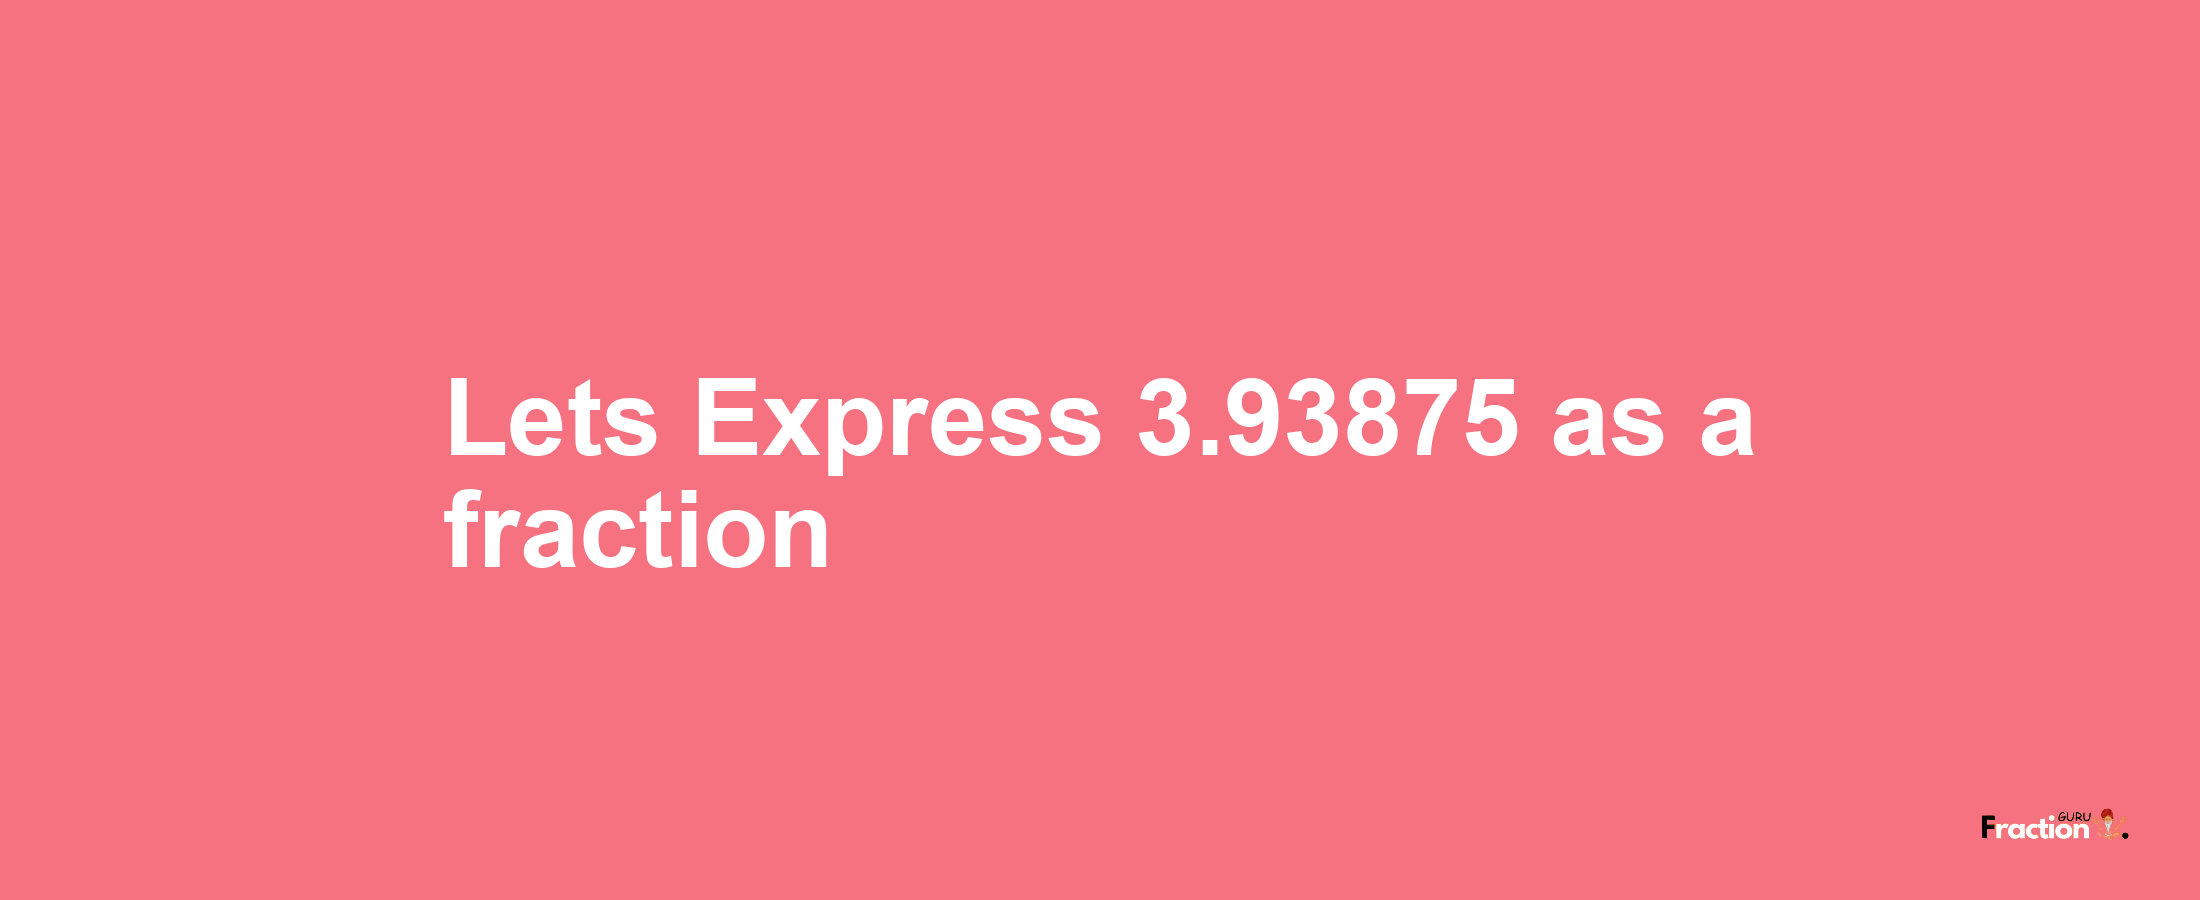 Lets Express 3.93875 as afraction